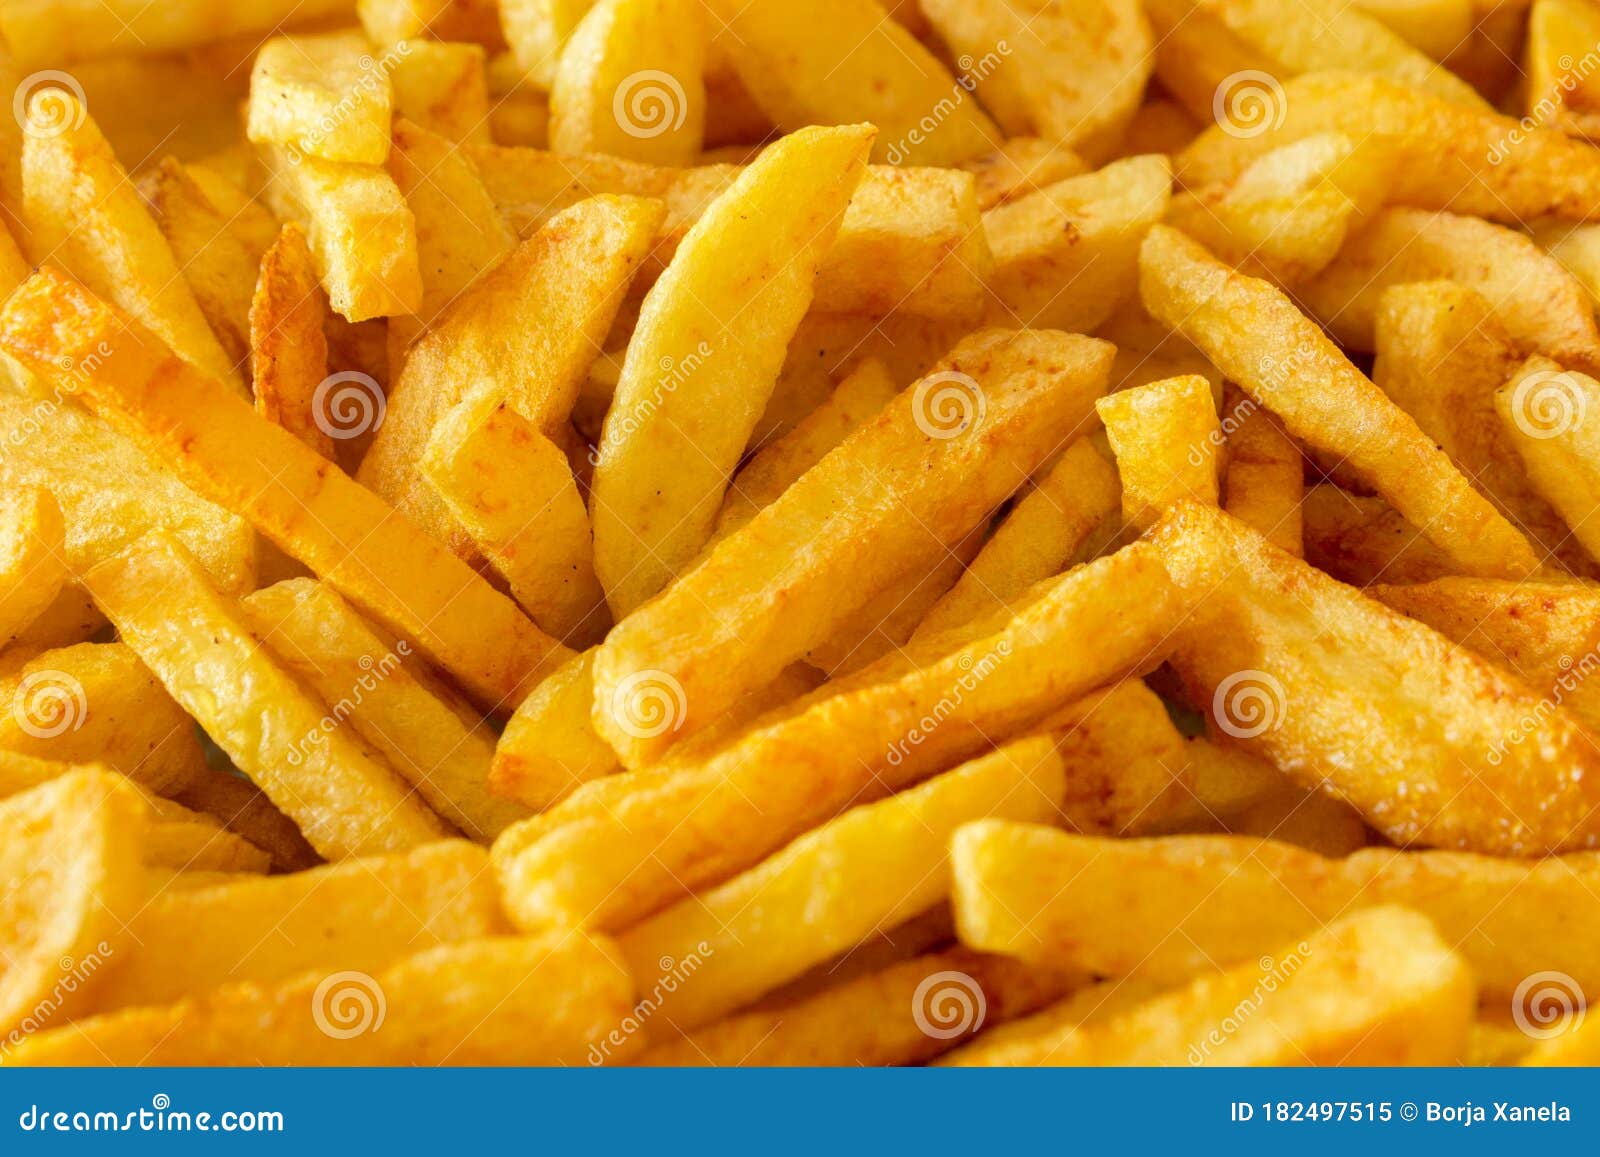 French Fried Background Fast Food Plate Of Potatoes Stock Image Image Of Fast Calories 182497515,Magic Rubber Band Tricks